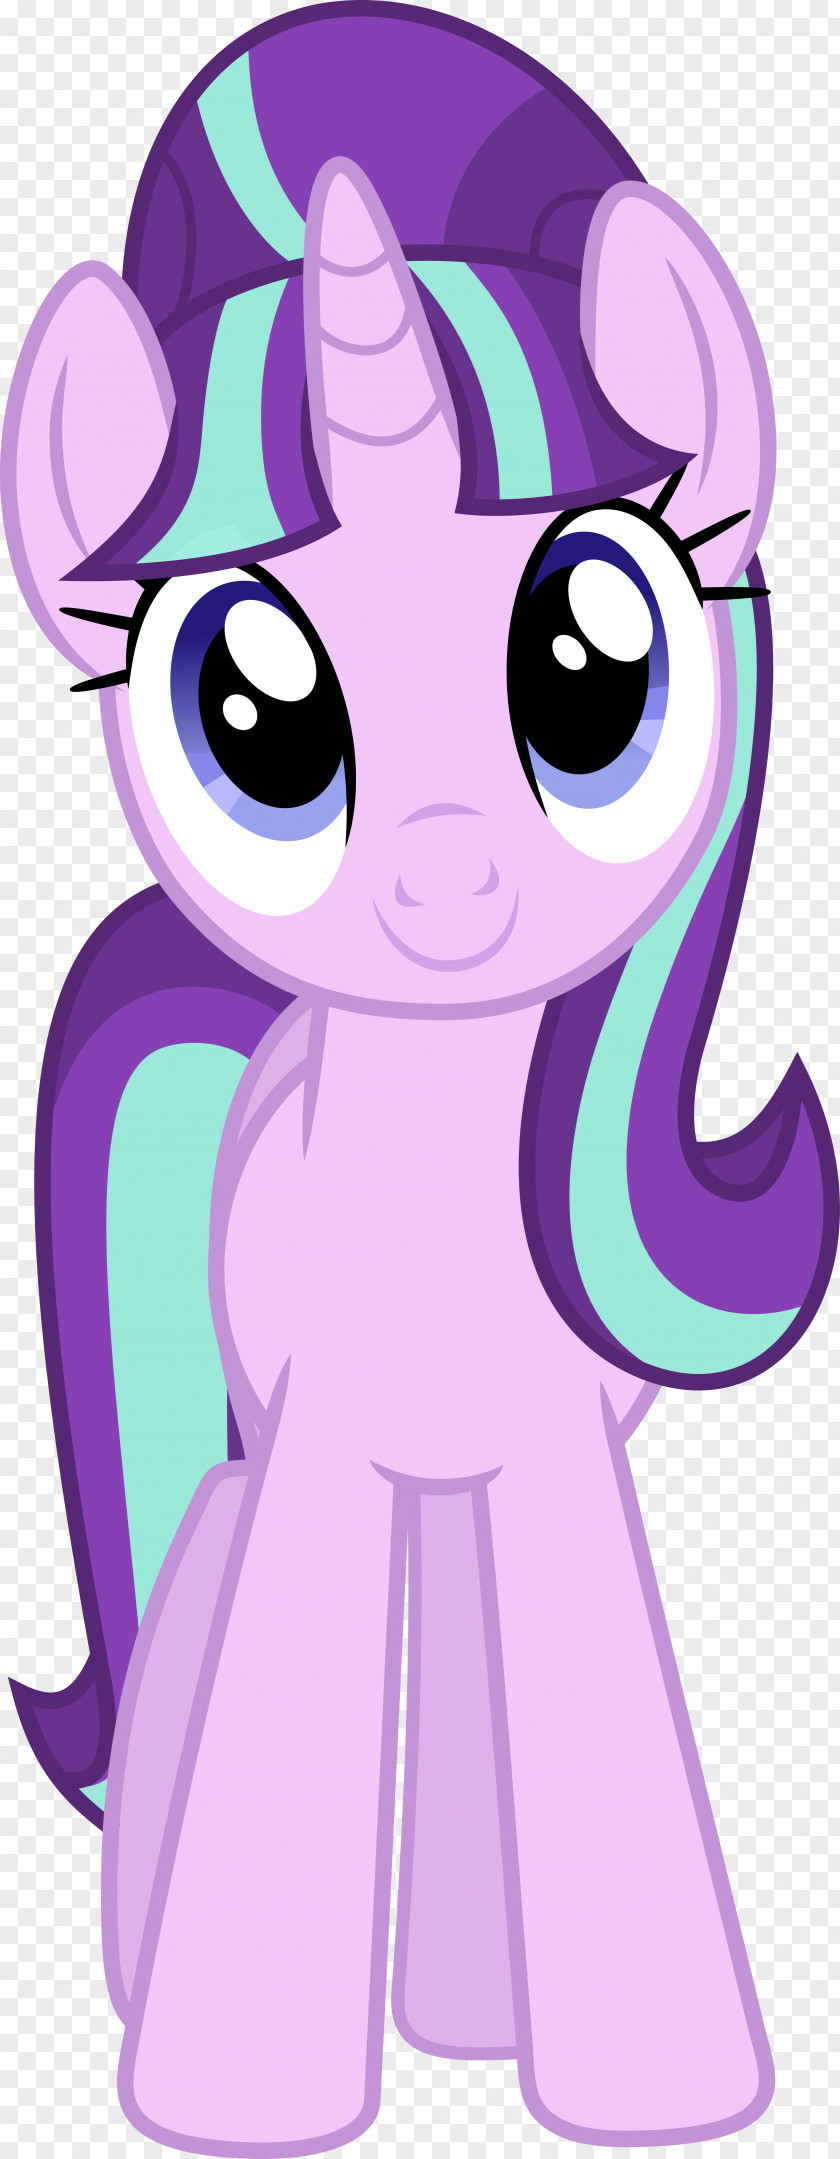 Believing Vector Twilight Sparkle Rainbow Dash Pinkie Pie Sunset Shimmer Pony PNG